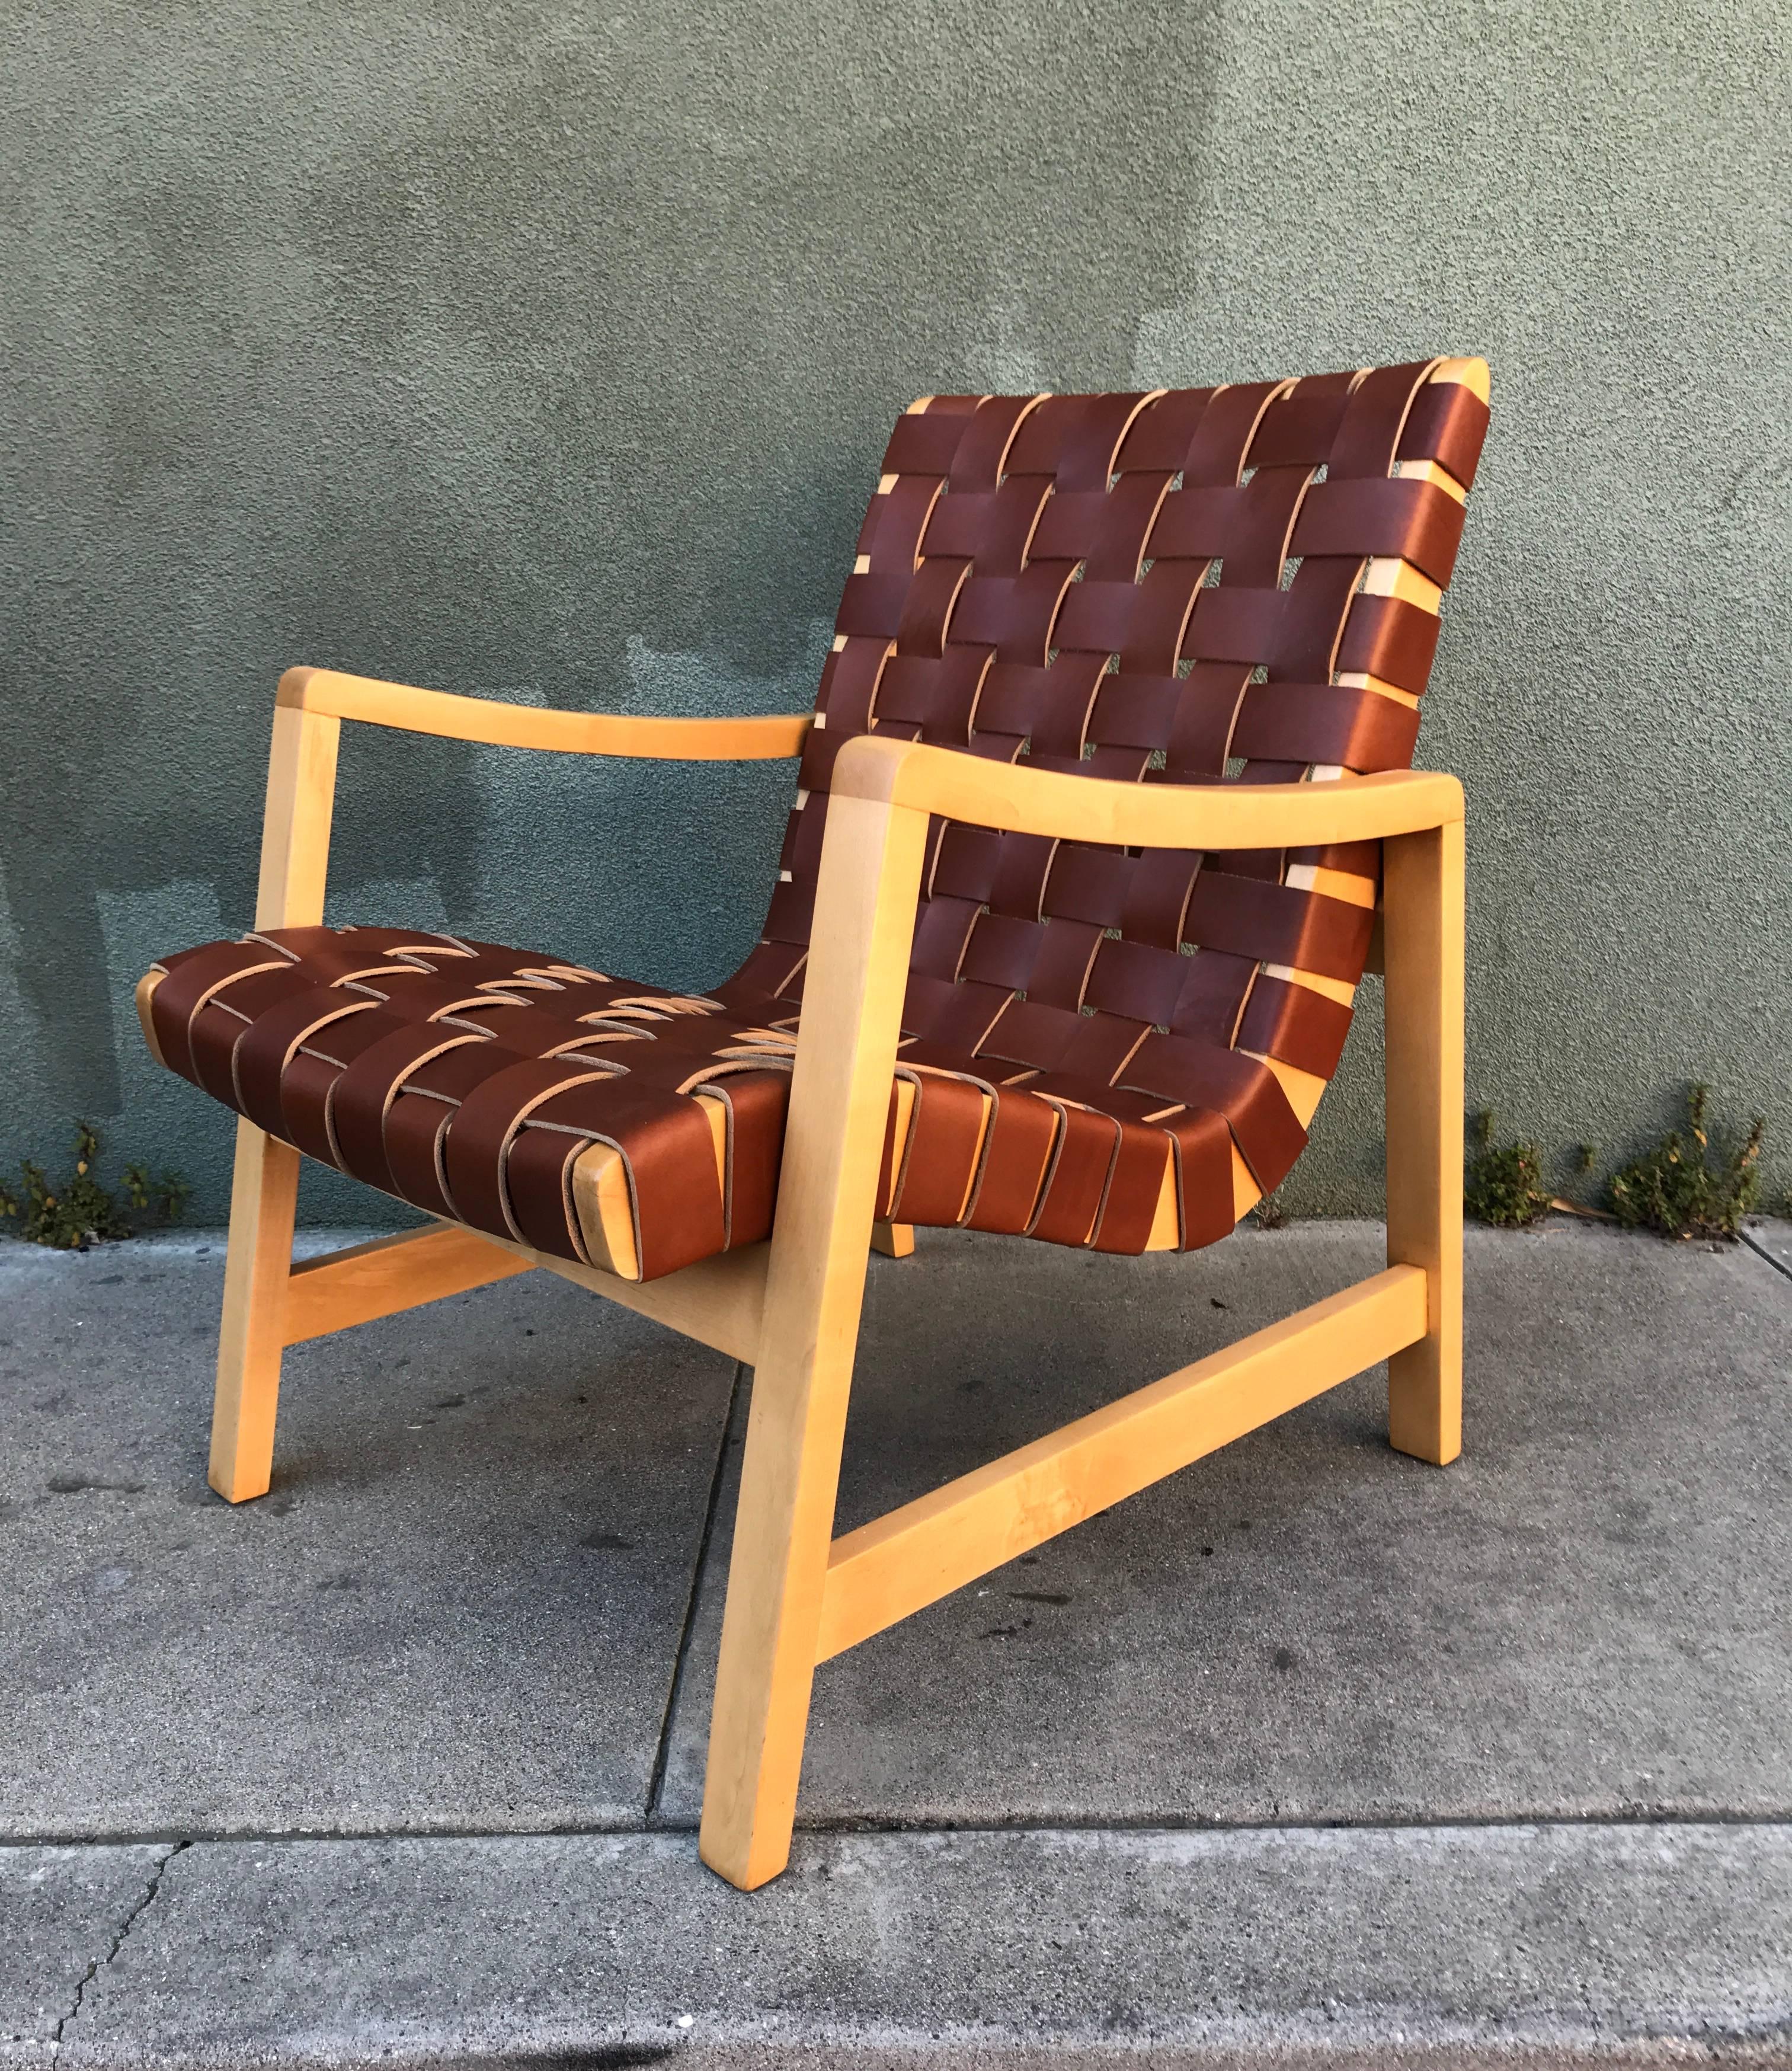 Created in 1941 for Knoll by designer Jens Risom is this model 652 U1/2 armchair. This model is a 1950s production (production run was from 1941 to 1960) that has been fully restored, the hard maple frame refinished and lacquered and rich brown